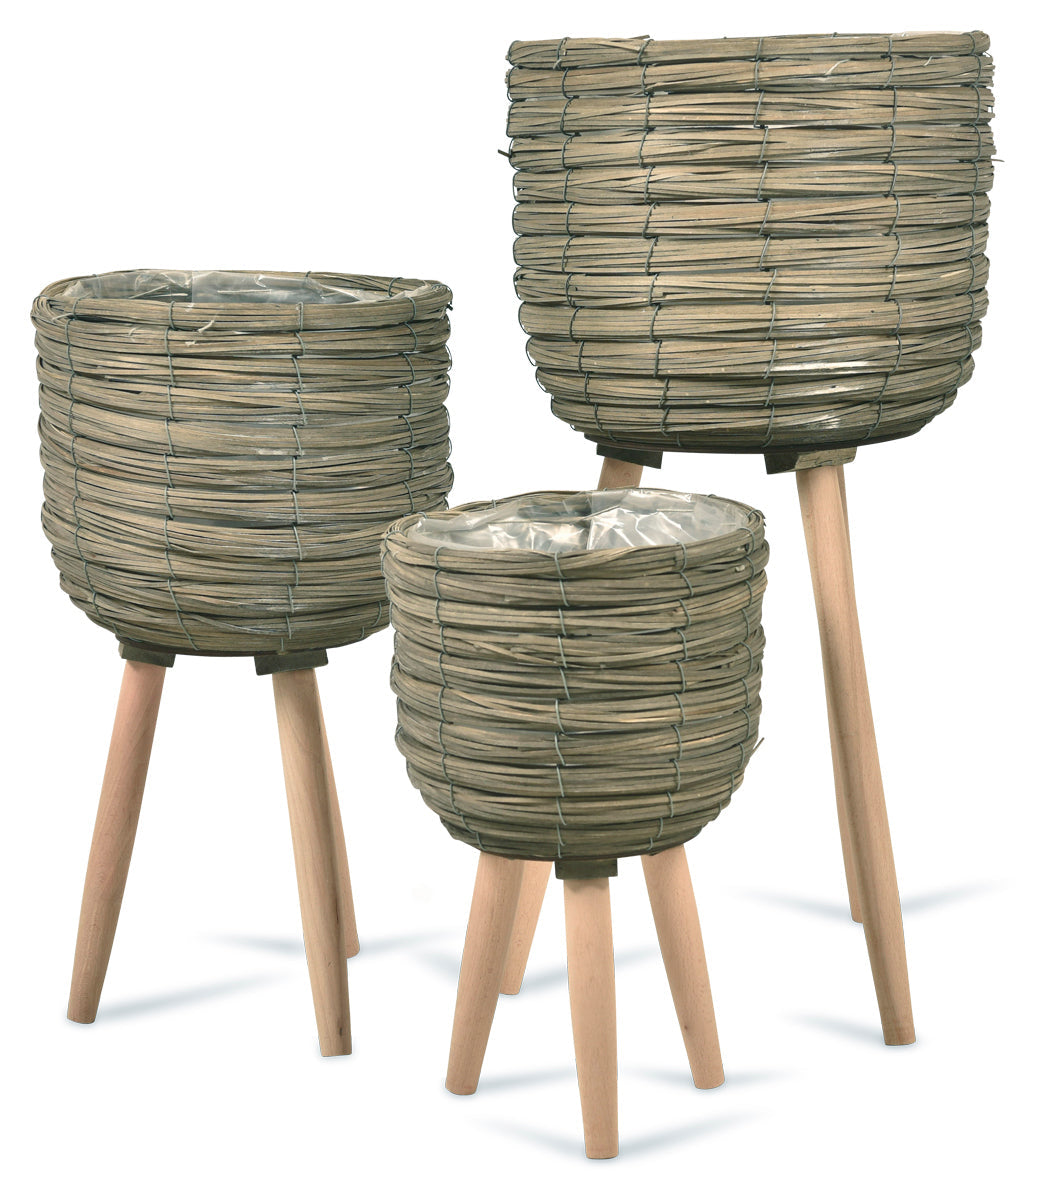 Woven Planters on Legs - White Wash (Set of 3)